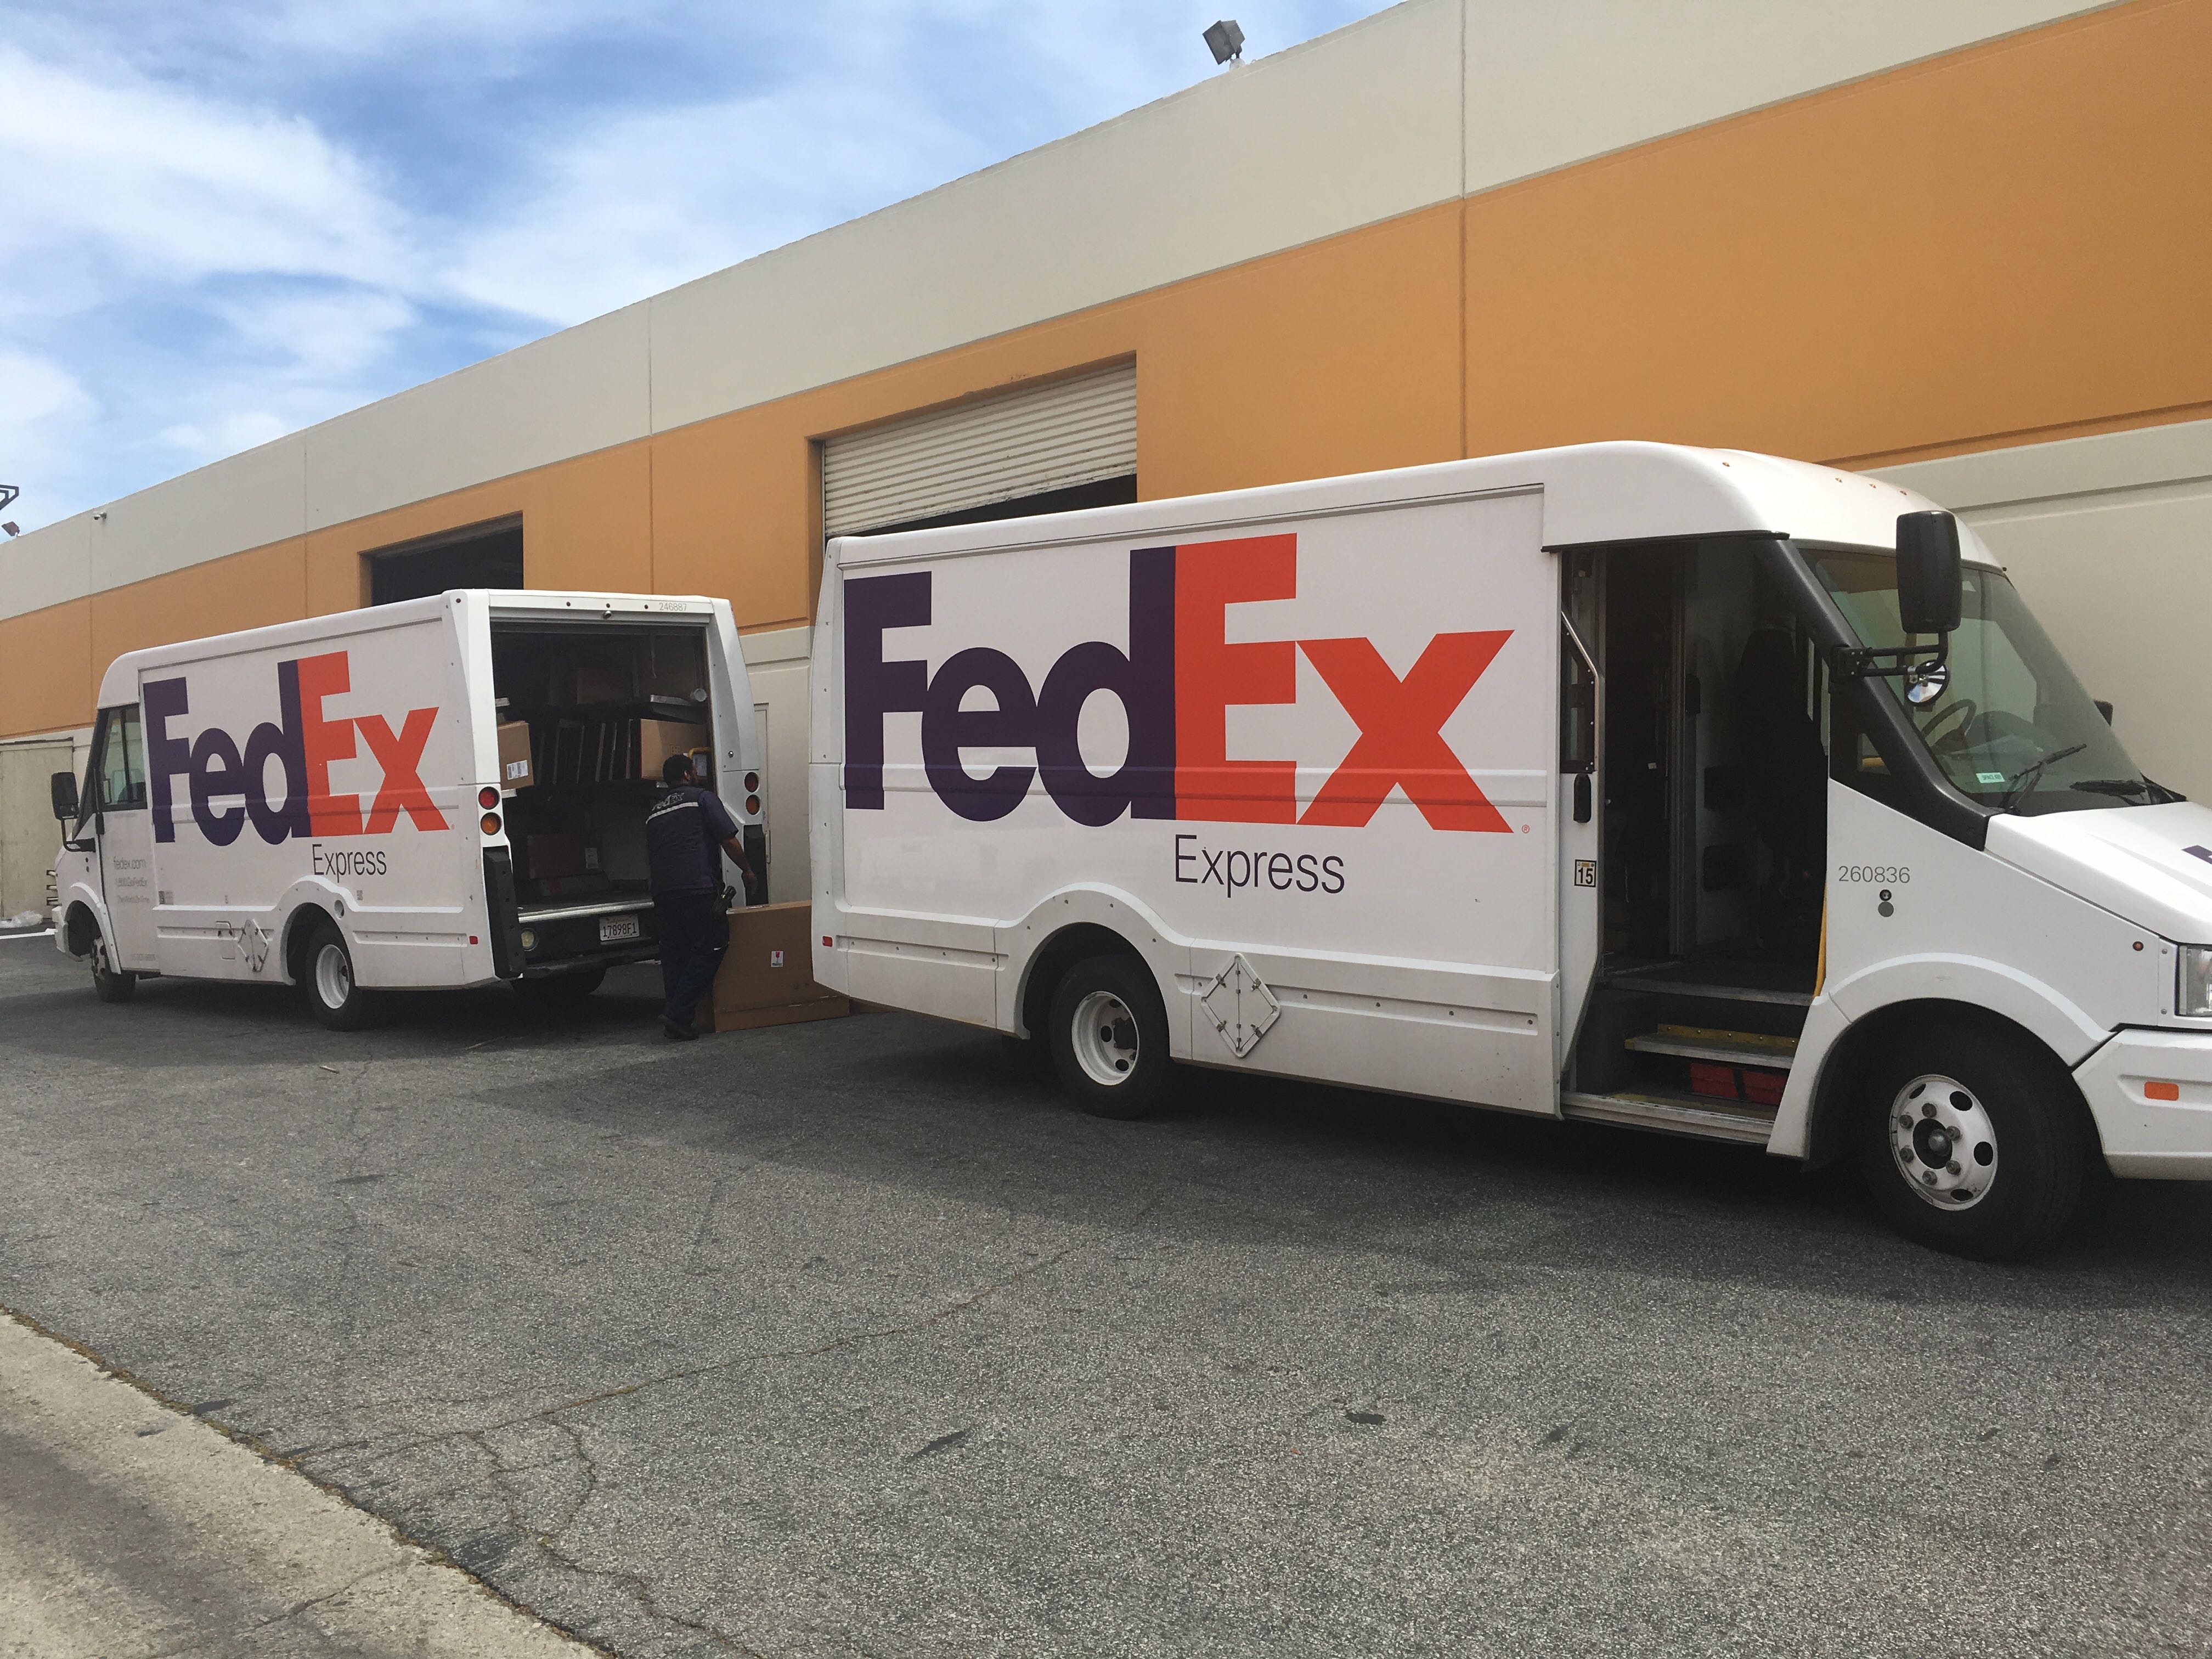 Fedex Trucks waiting for packages